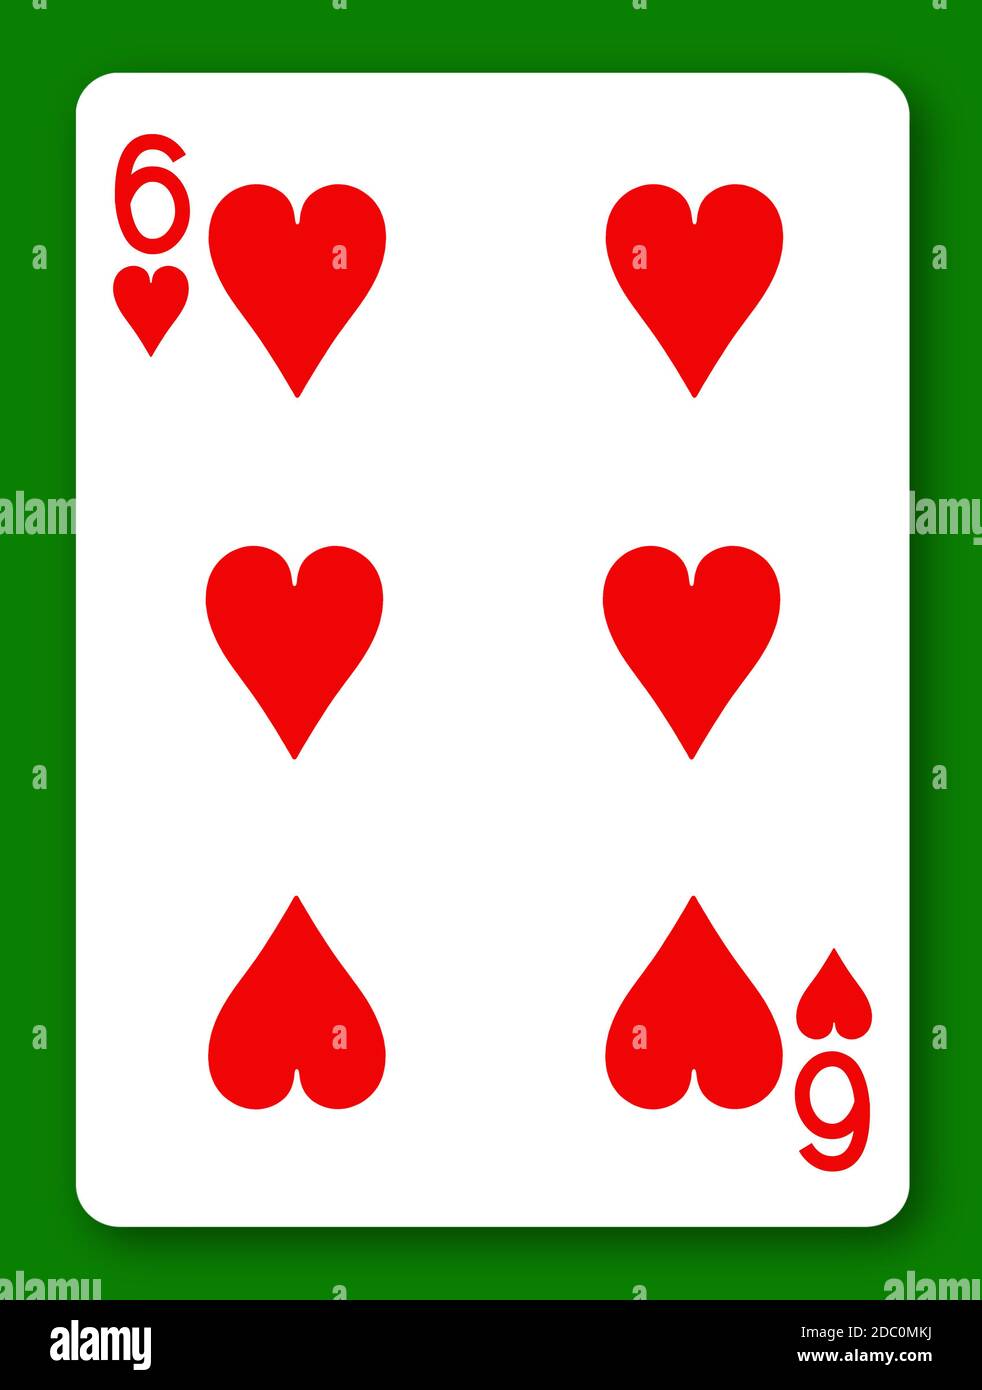 A 6 Six of Hearts playing card with clipping path to remove background and shadow Stock Photo